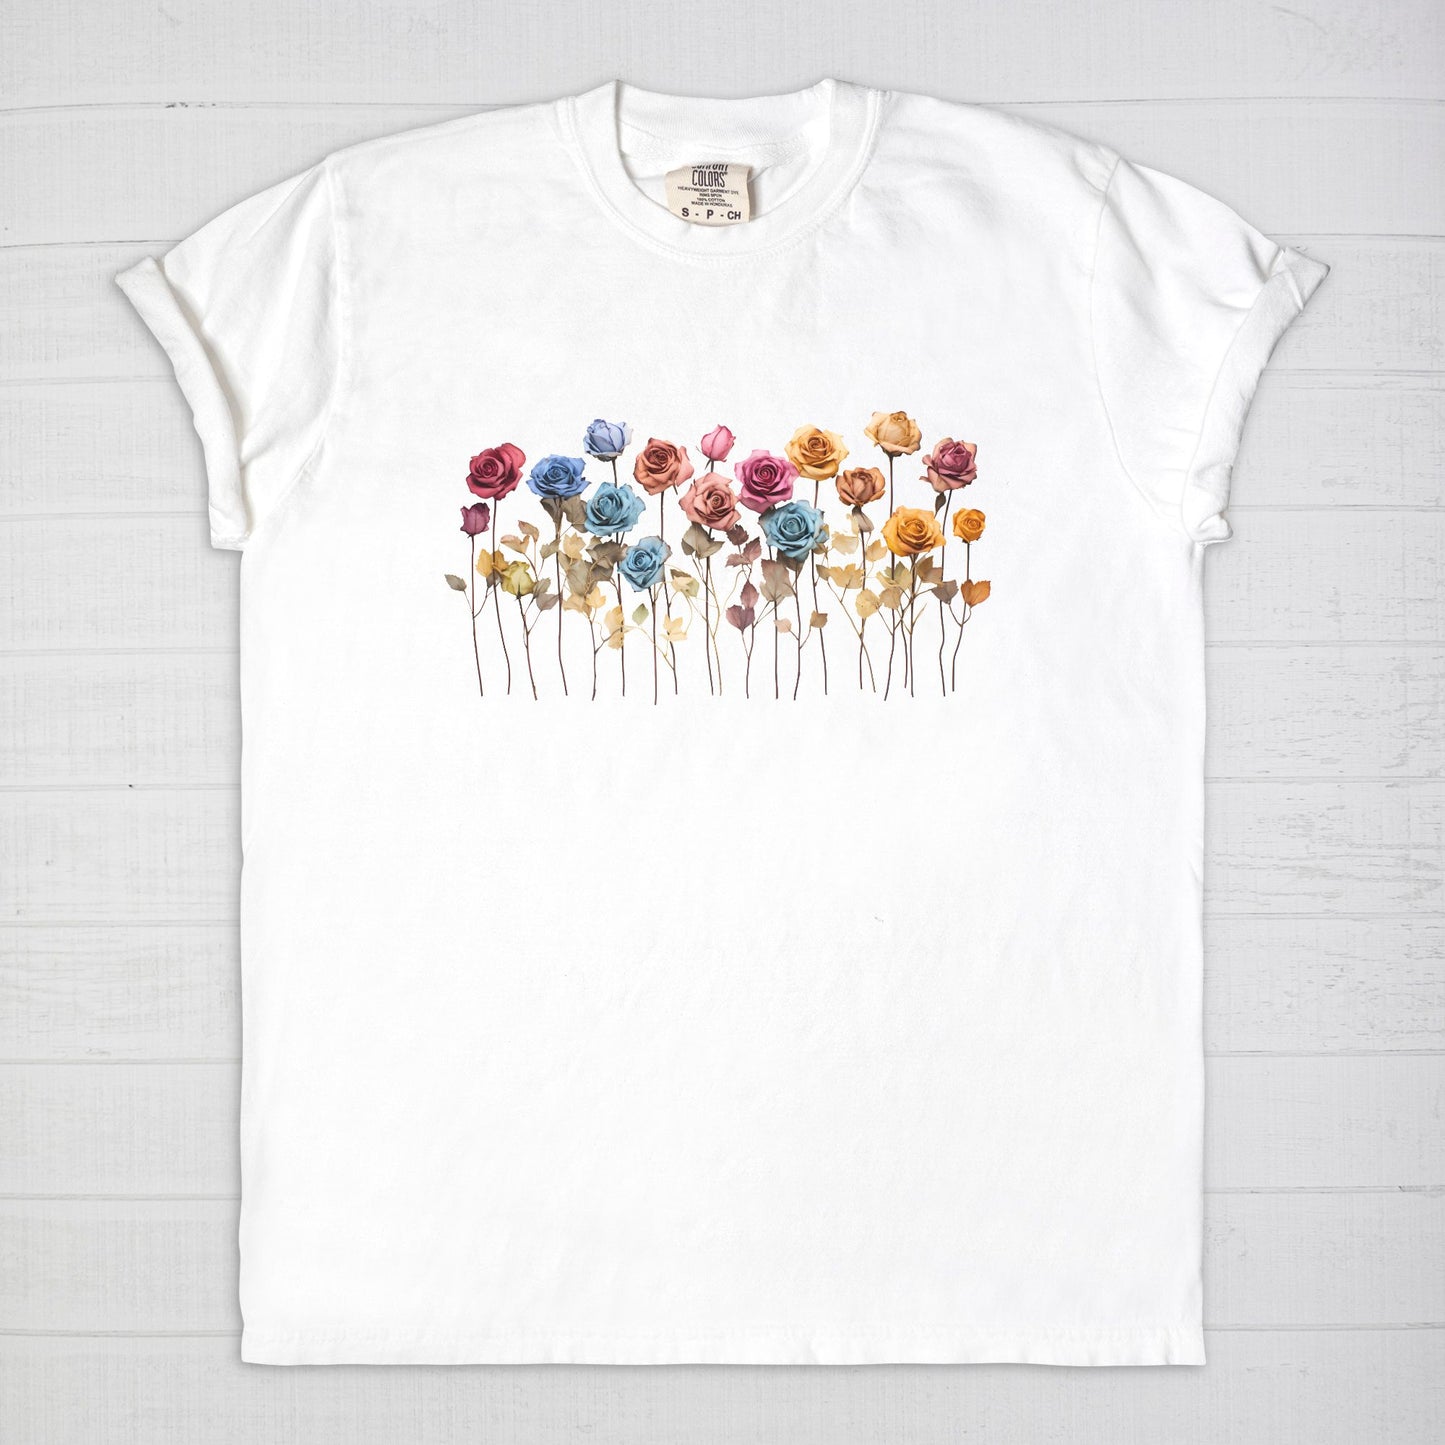 Flower Boho Wildflowers Comfortable Tee is free-spirited charm with our unique designs by Sorcery Soap + Hocus Pocus Craft